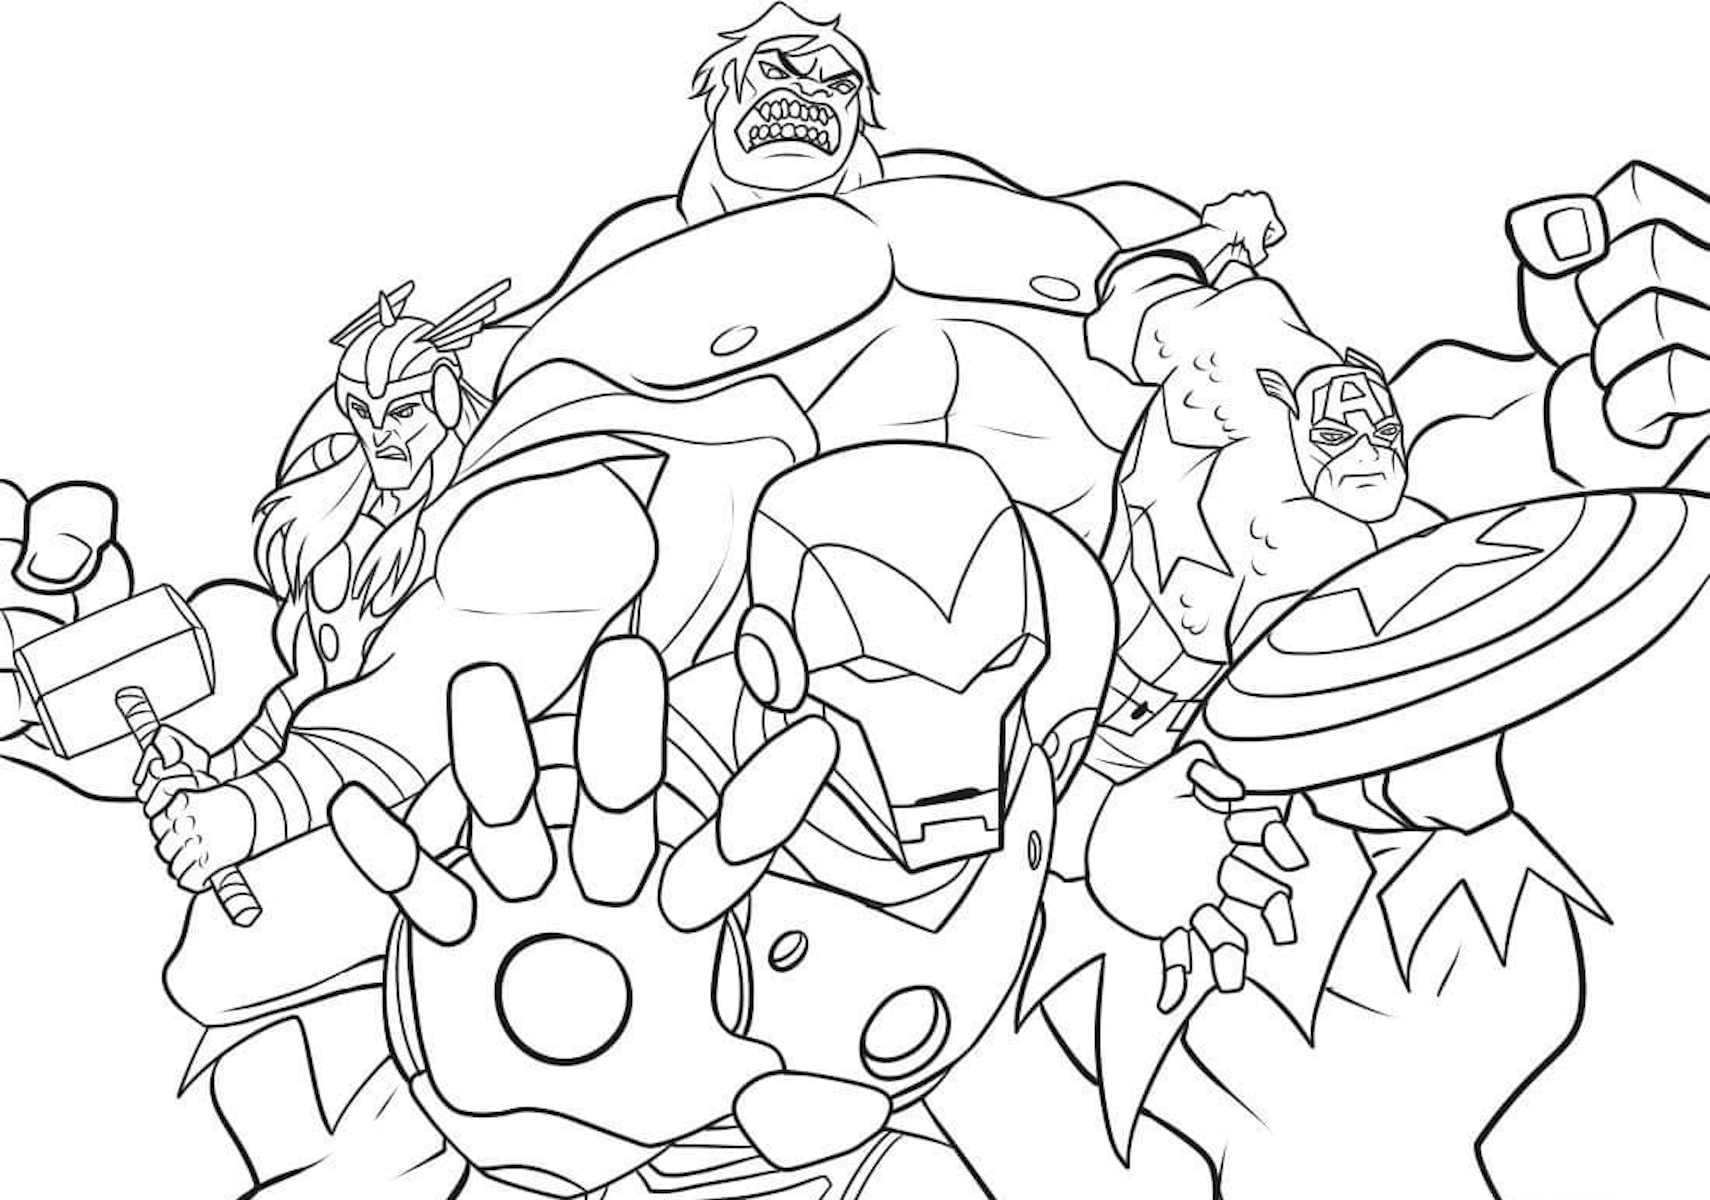 Avengers 25 of Avengers coloring page to print and color